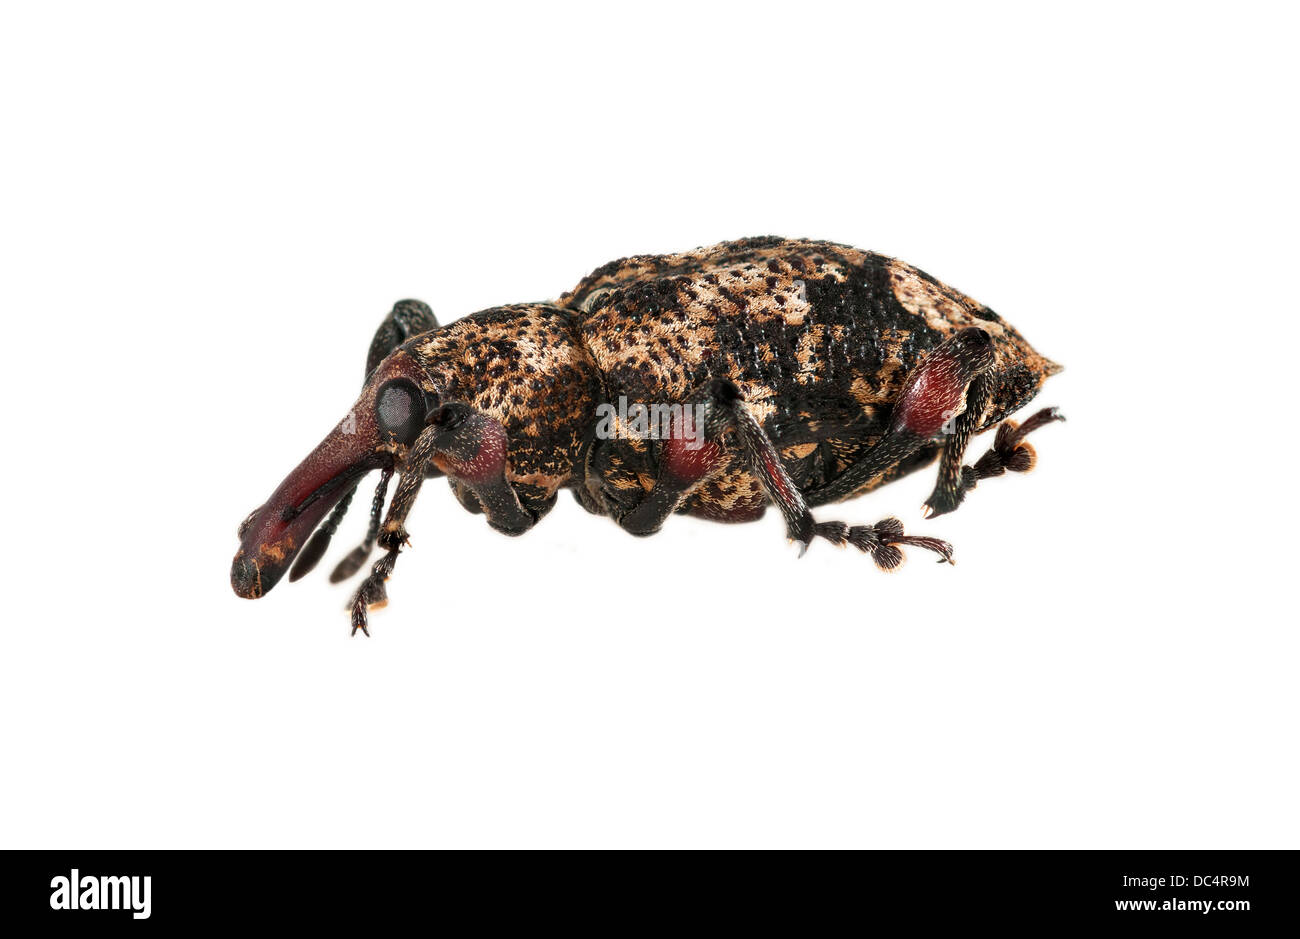 Weevil (Snout beetle), Curculionidae family, Tambopata Nature Reserve, Madre de Dios region, Peru Stock Photo